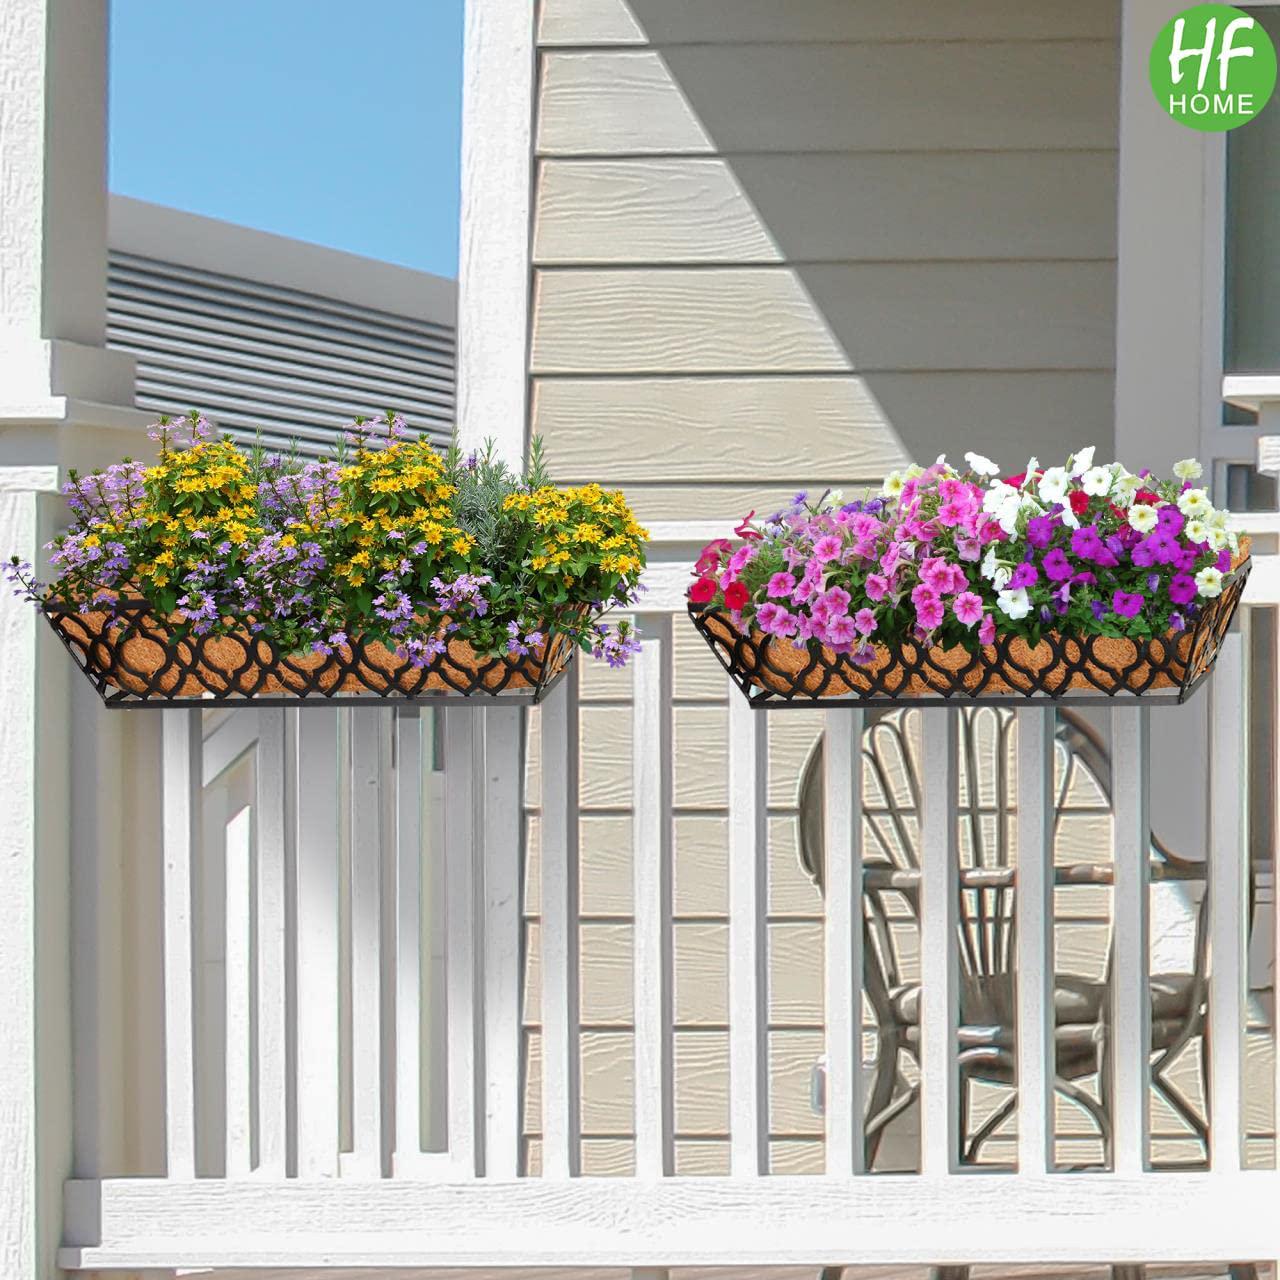 HFHOME 24 Inch Window Deck with Coco Liner, 24 Window Boxes Horse Trough with Coconut Coir Liner, Black Metal Hanging Flower Planter Basket Railing Planter - 4 Pack